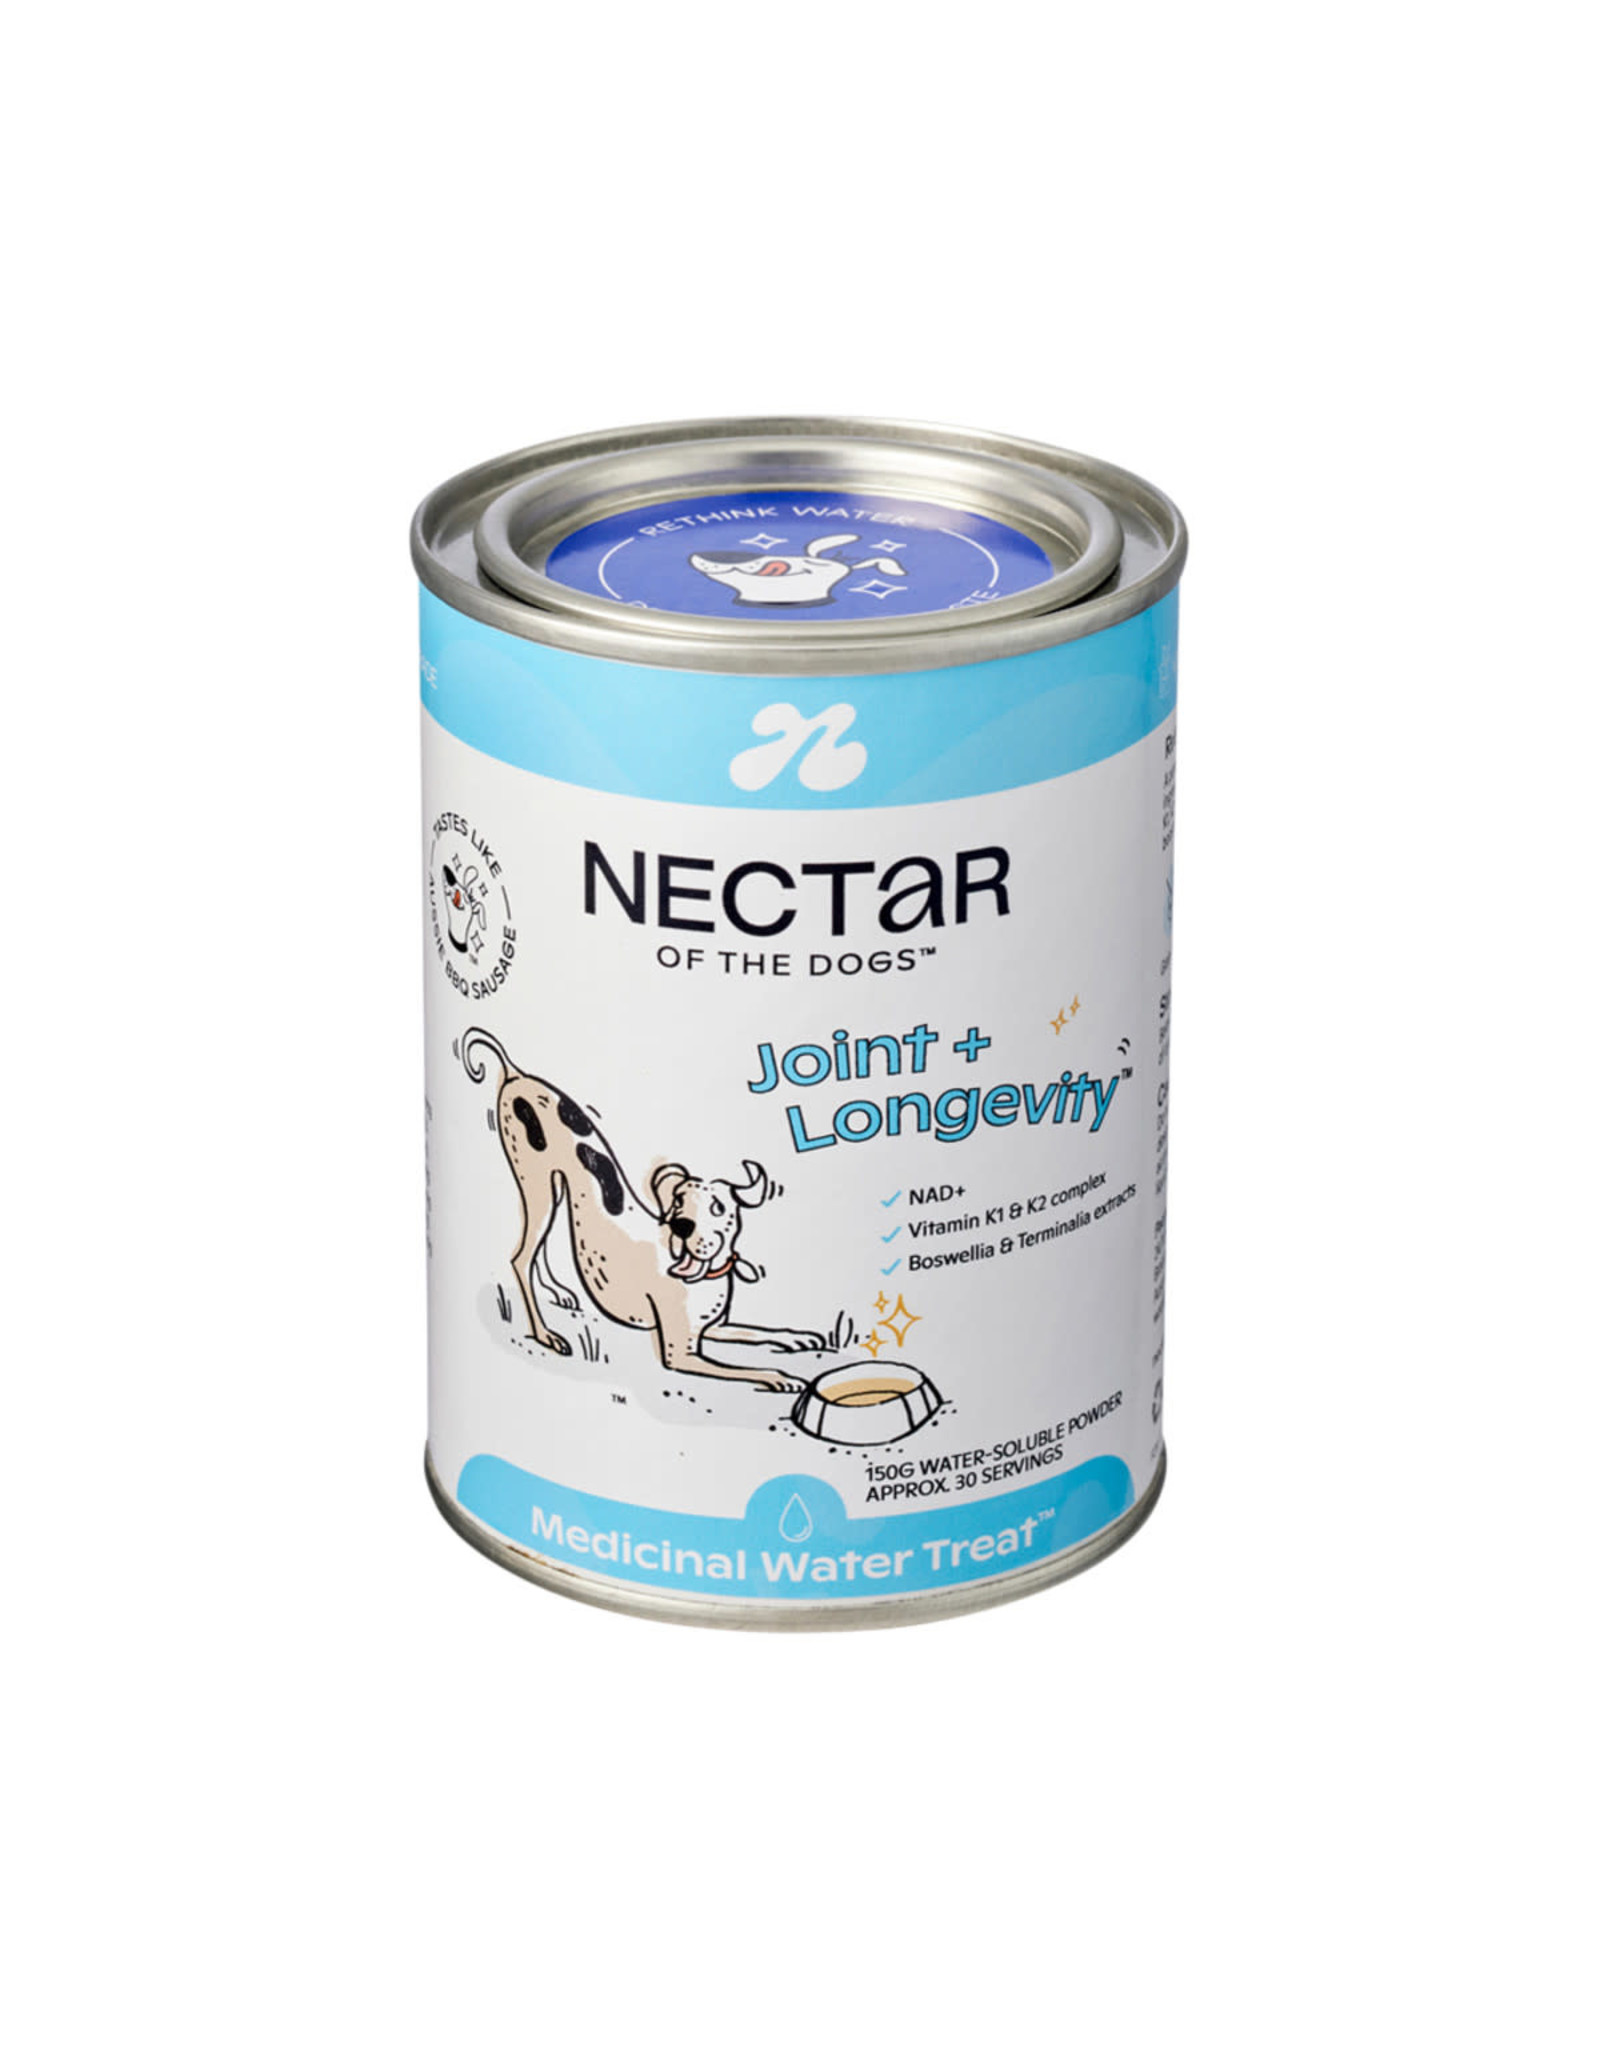 Nectar of the Dogs Joint + Longevity (Medicinal Water Treat) Soluble Powder 150g